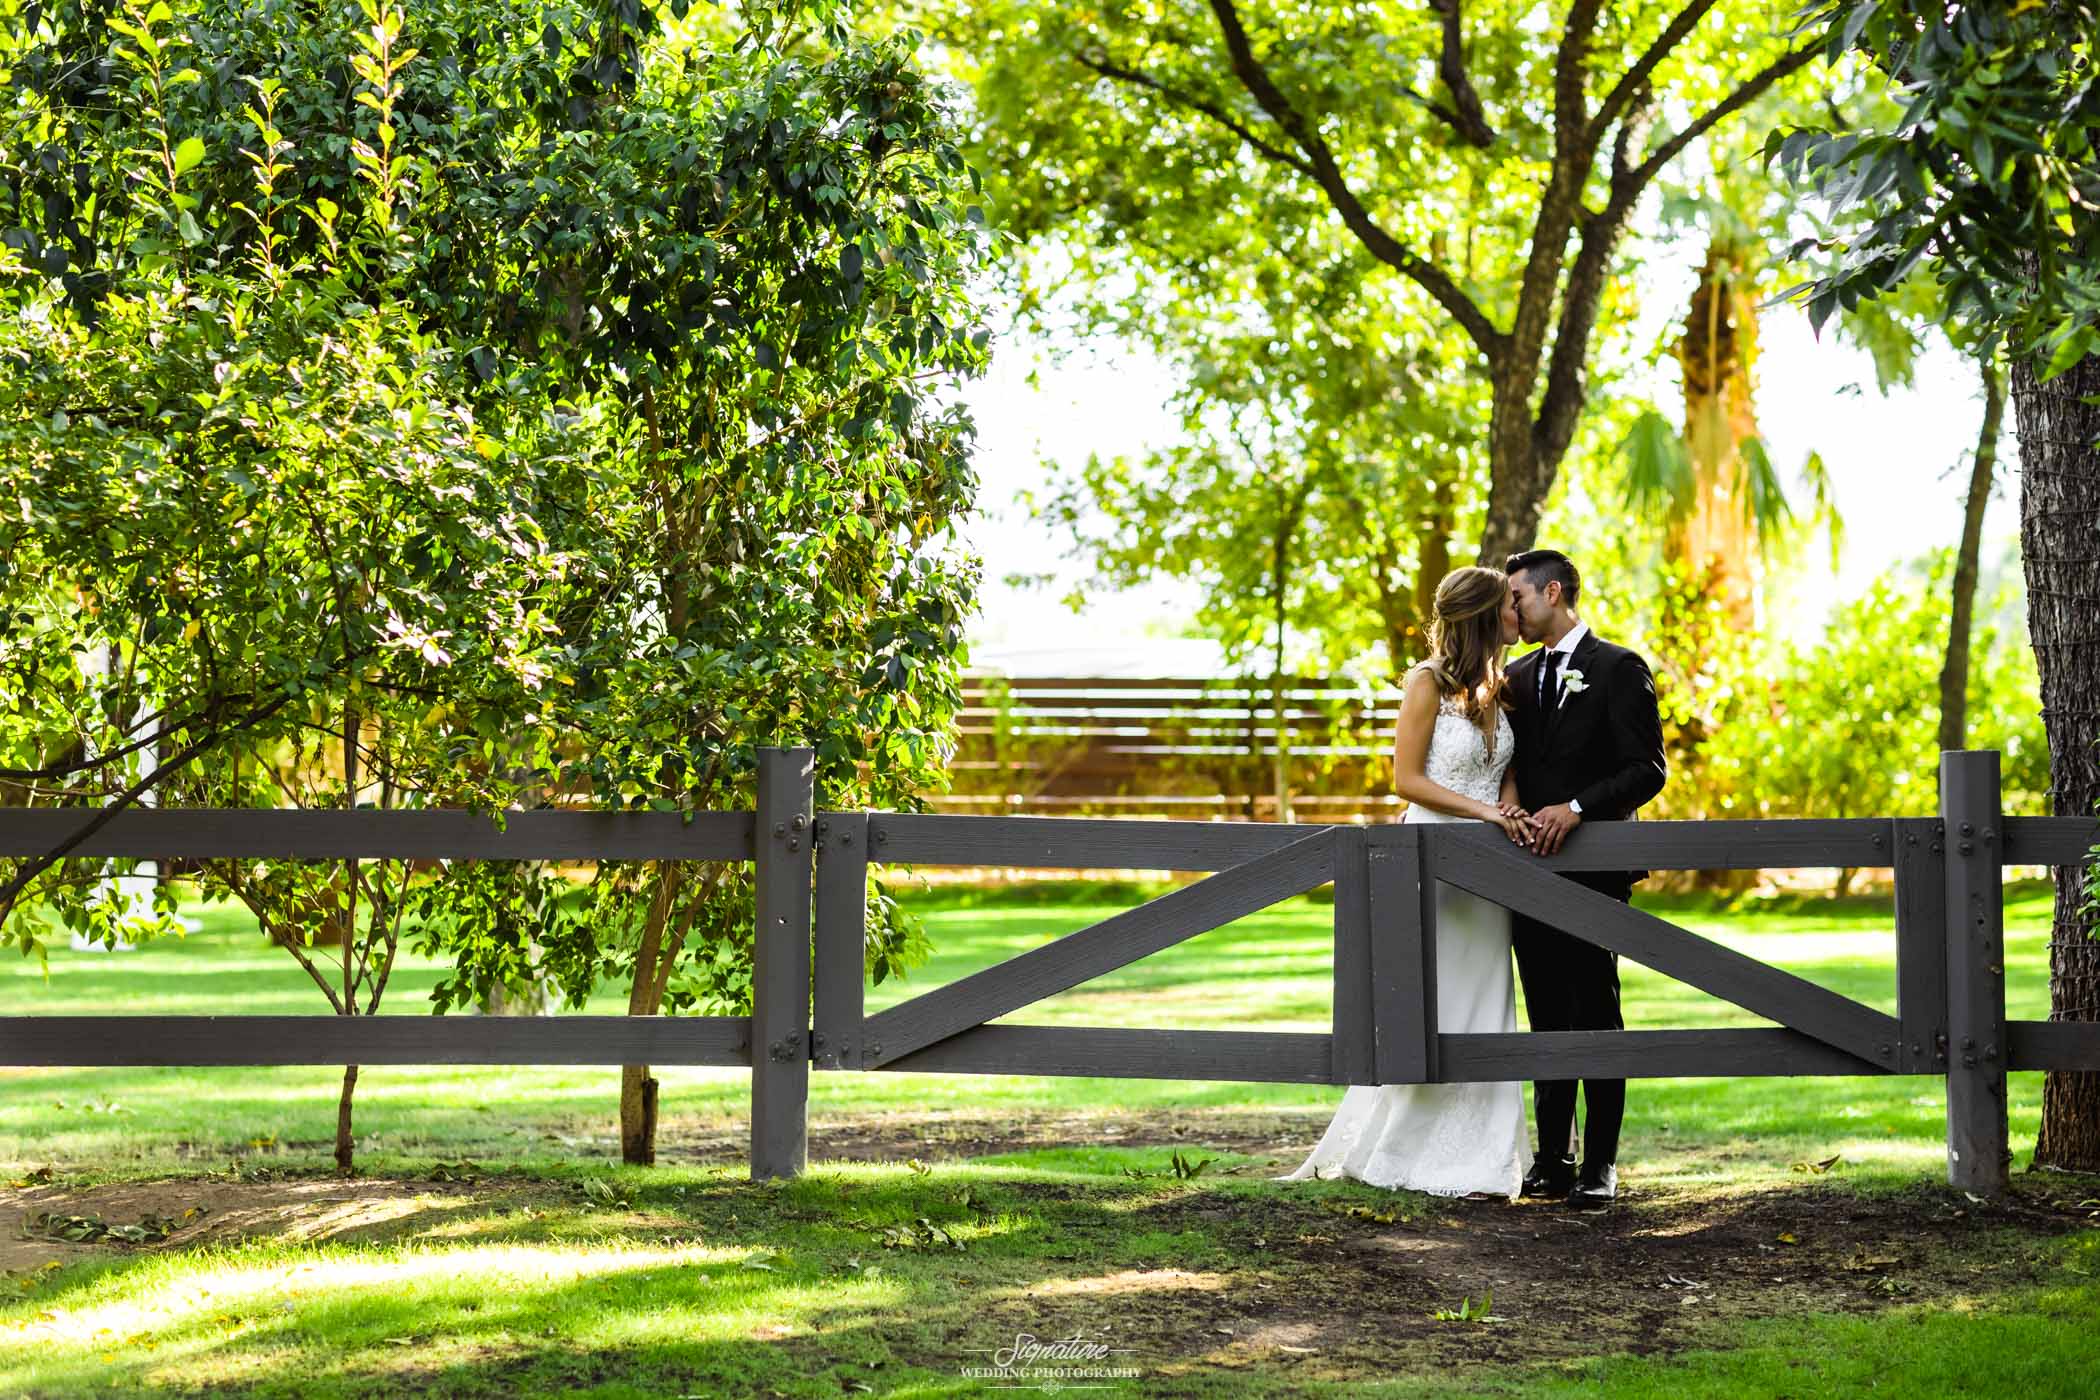 Bride and groom kissing behind fence gate with trees